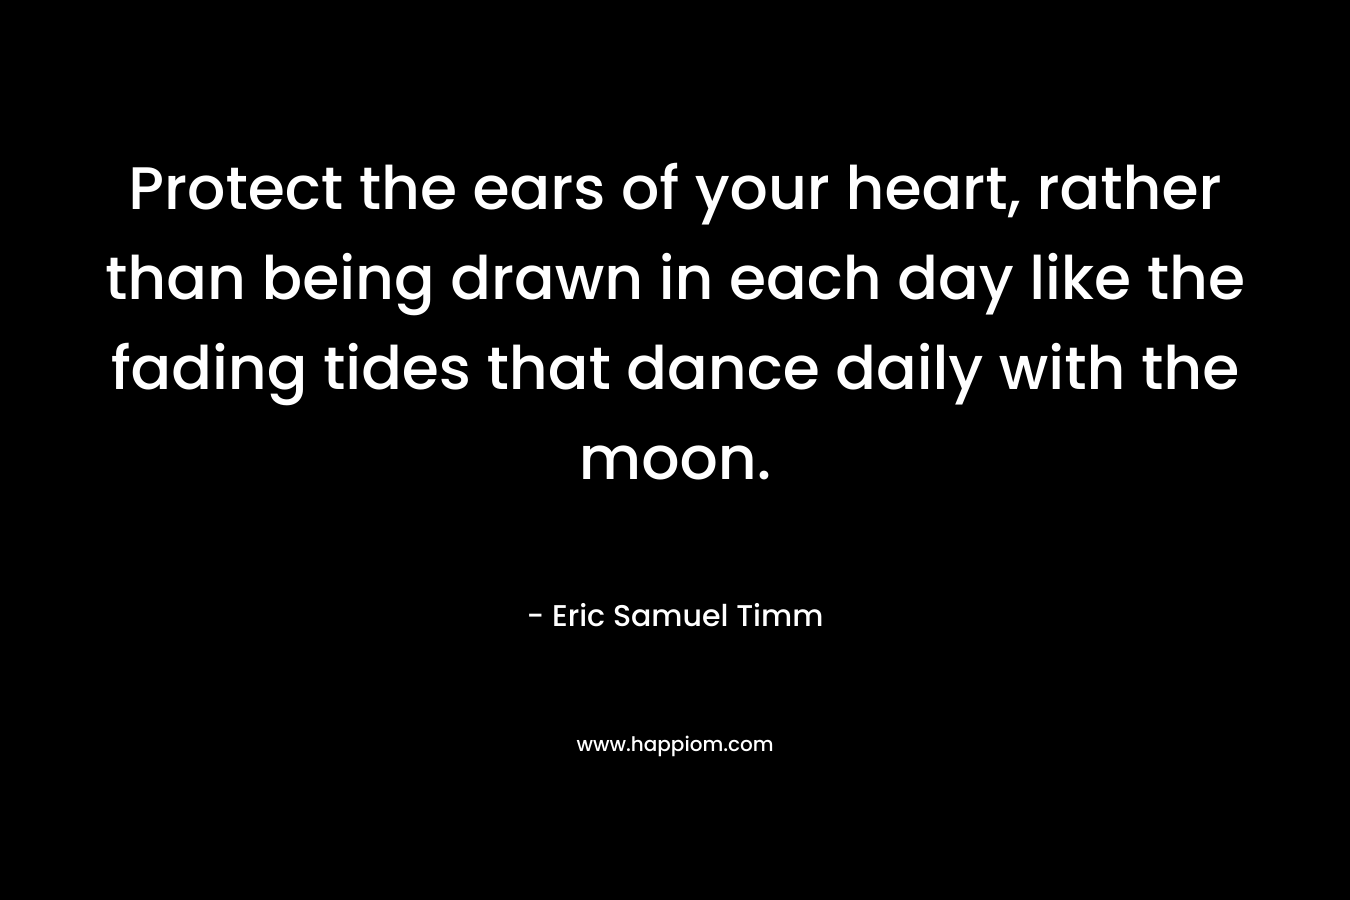 Protect the ears of your heart, rather than being drawn in each day like the fading tides that dance daily with the moon. – Eric Samuel Timm